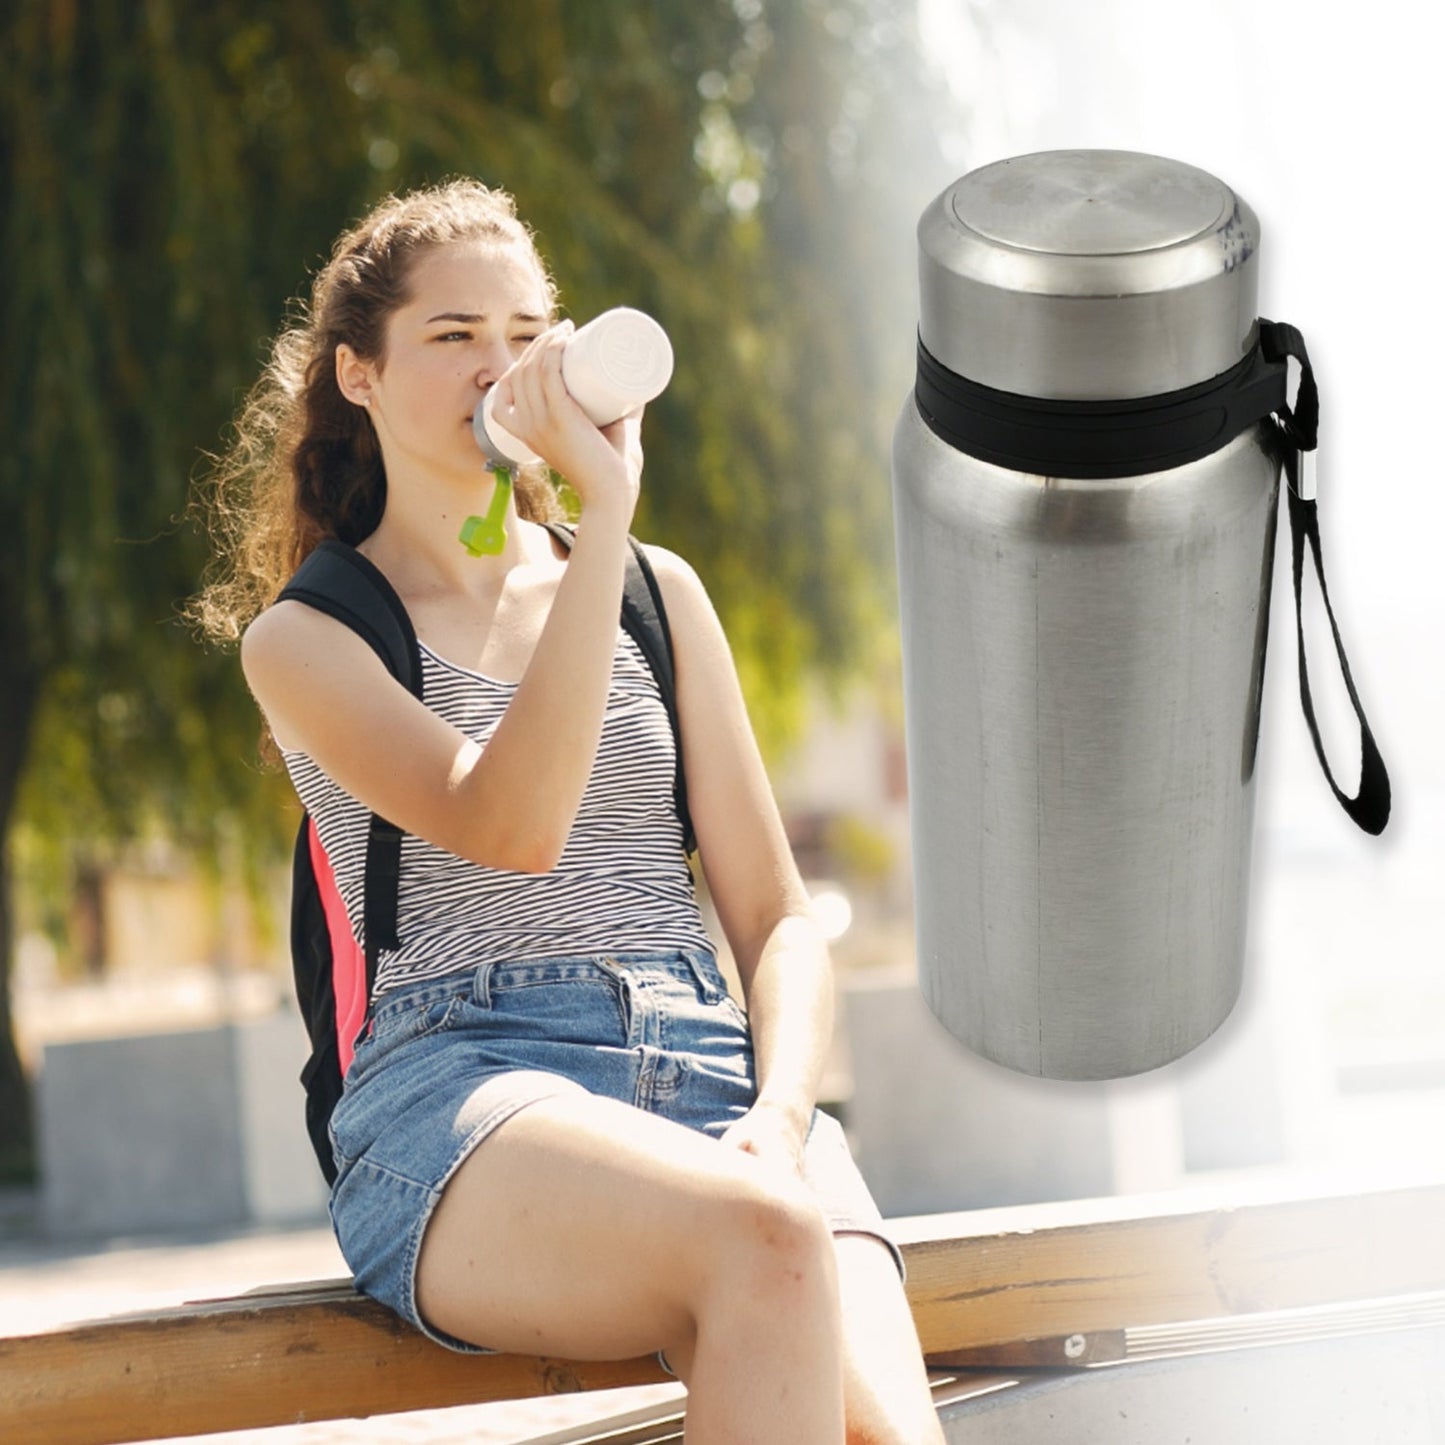 12754 Stainless Steel Water Bottle With Dori Easy to Carry Leak Proof, Rust Proof, Hot & Cold Drinks, Gym Sipper BPA Free Food Grade Quality, Steel fridge Bottle For office / Gym / School (600 Ml)